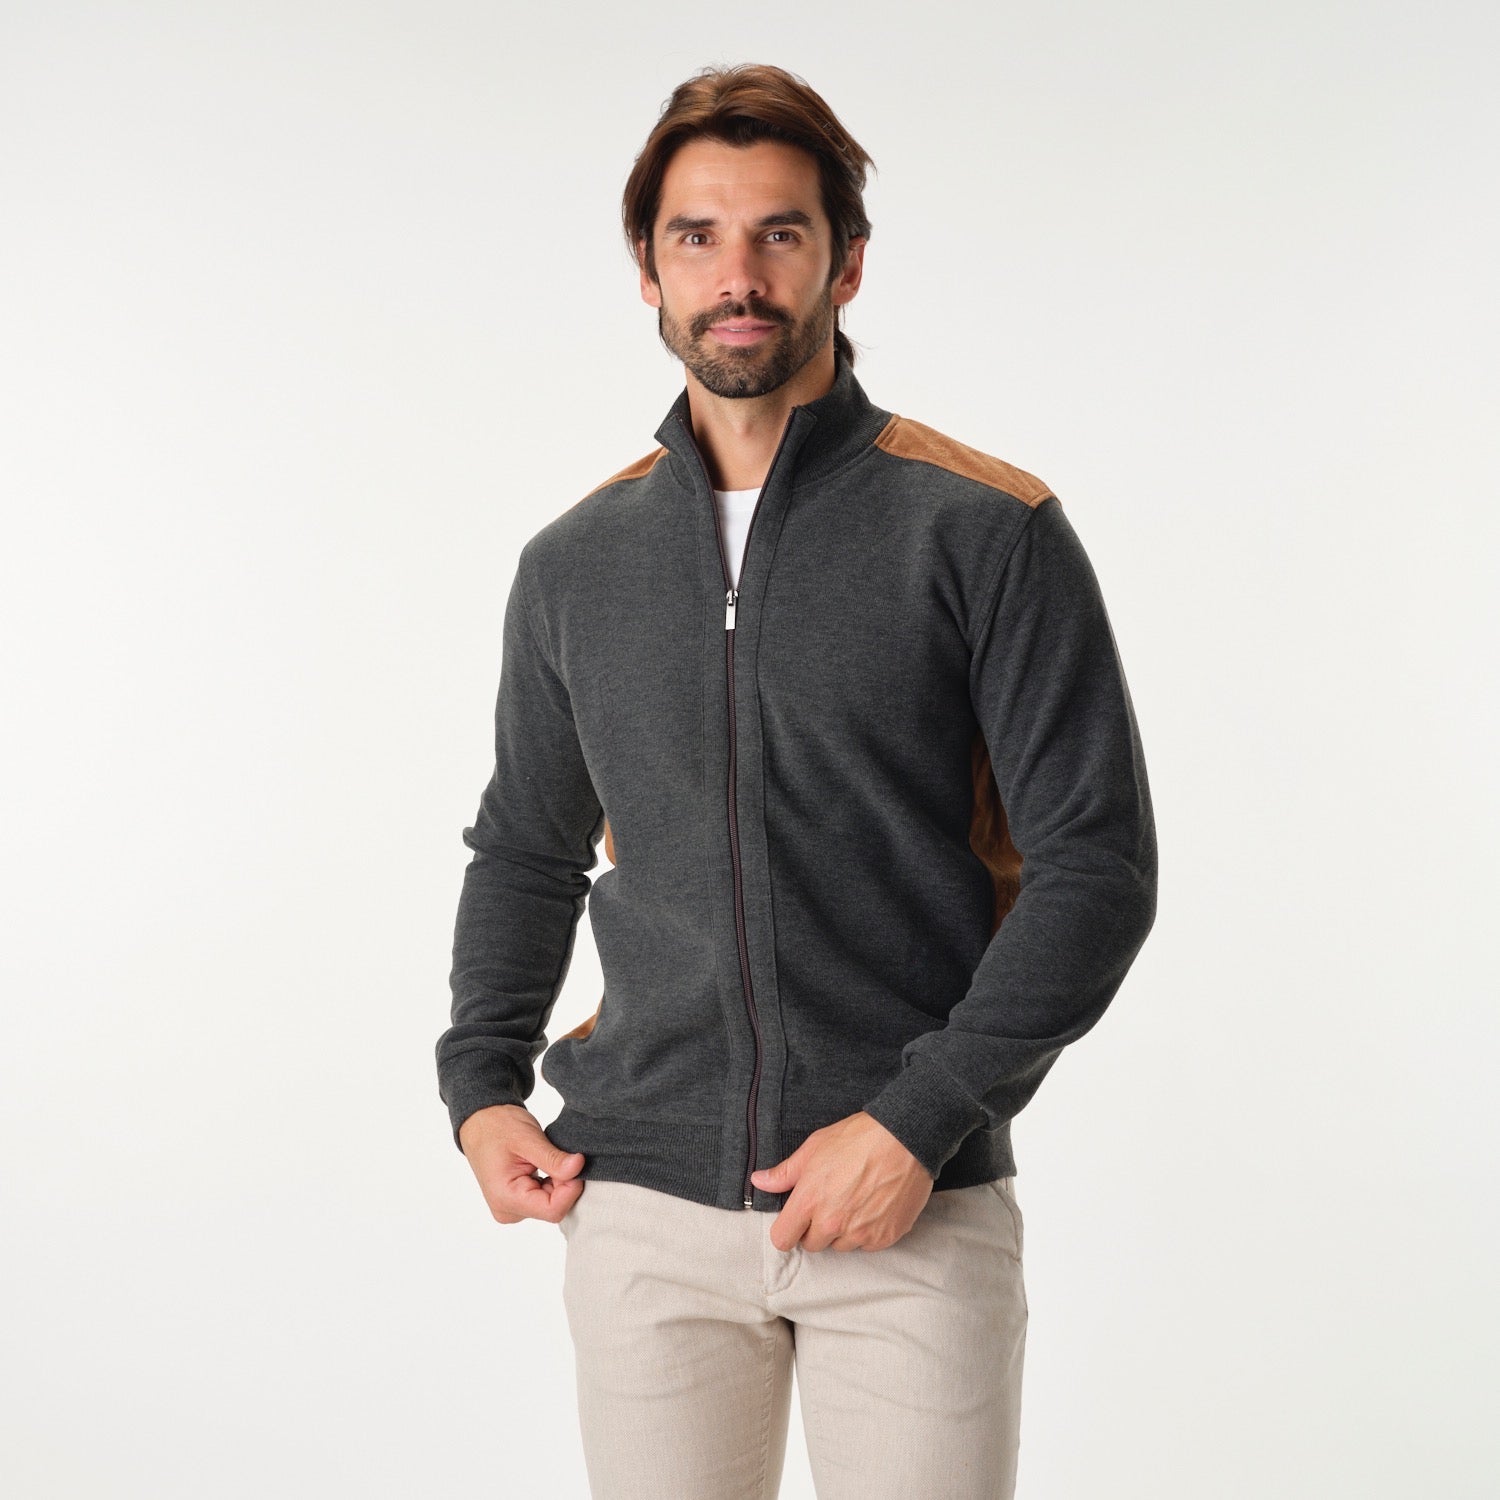 Solid Soft Full Zip Charcoal Sweater